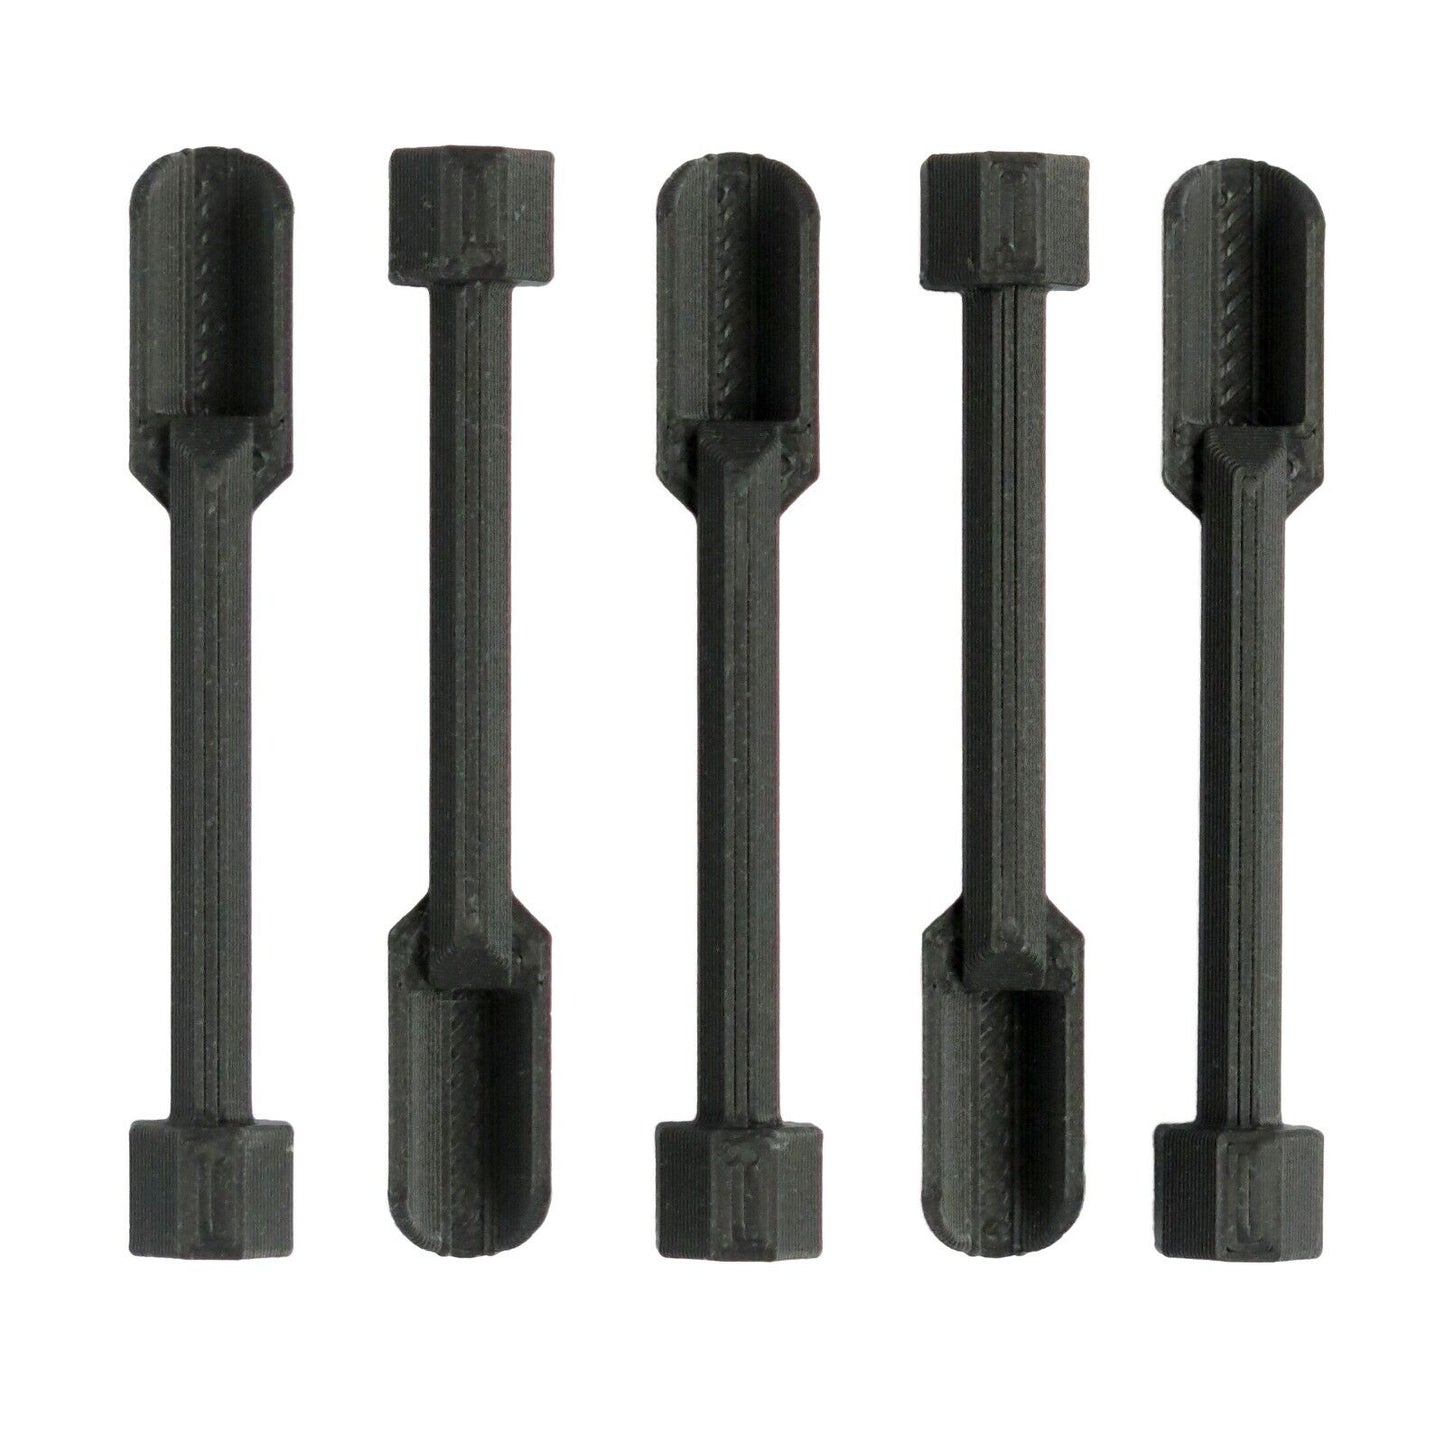 XMAX V3 Pro Packing & Scoop Tool (5pcs)